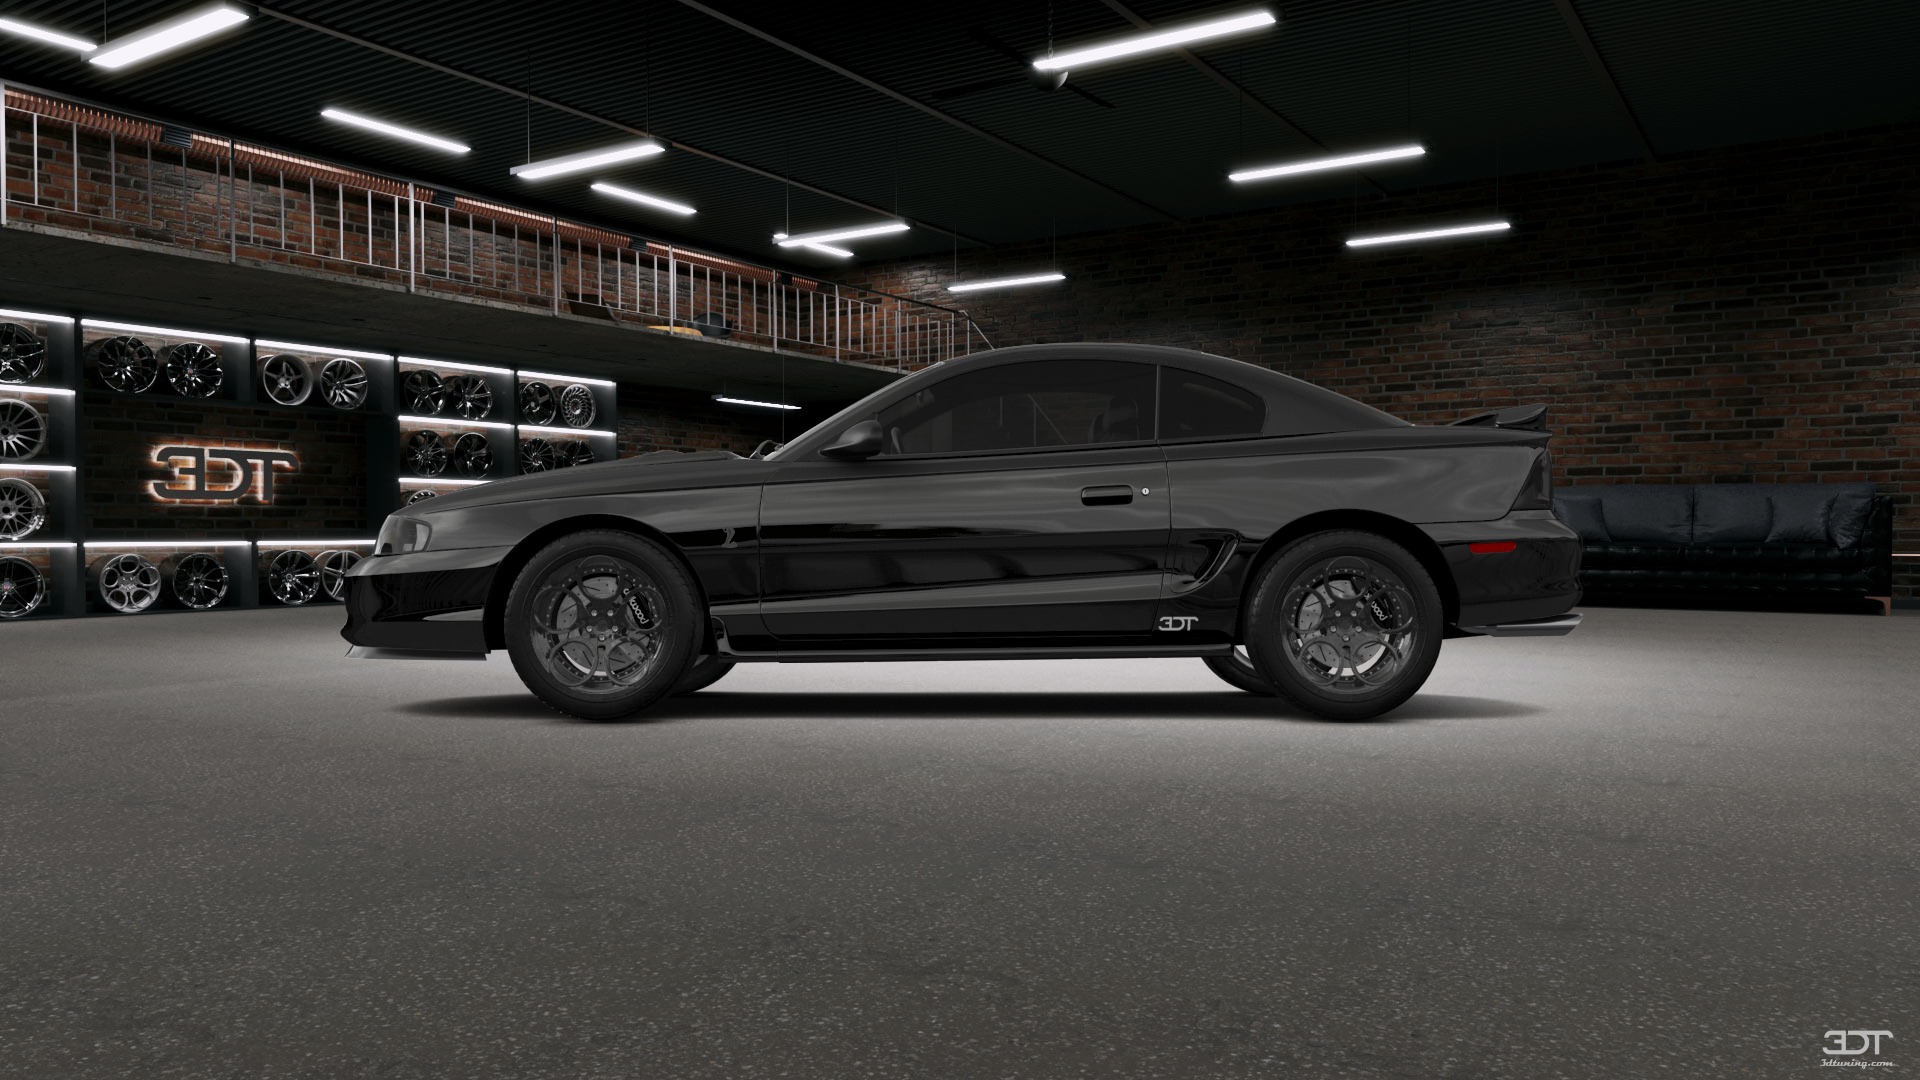 Ford Mustang 2 Door Coupe 1994